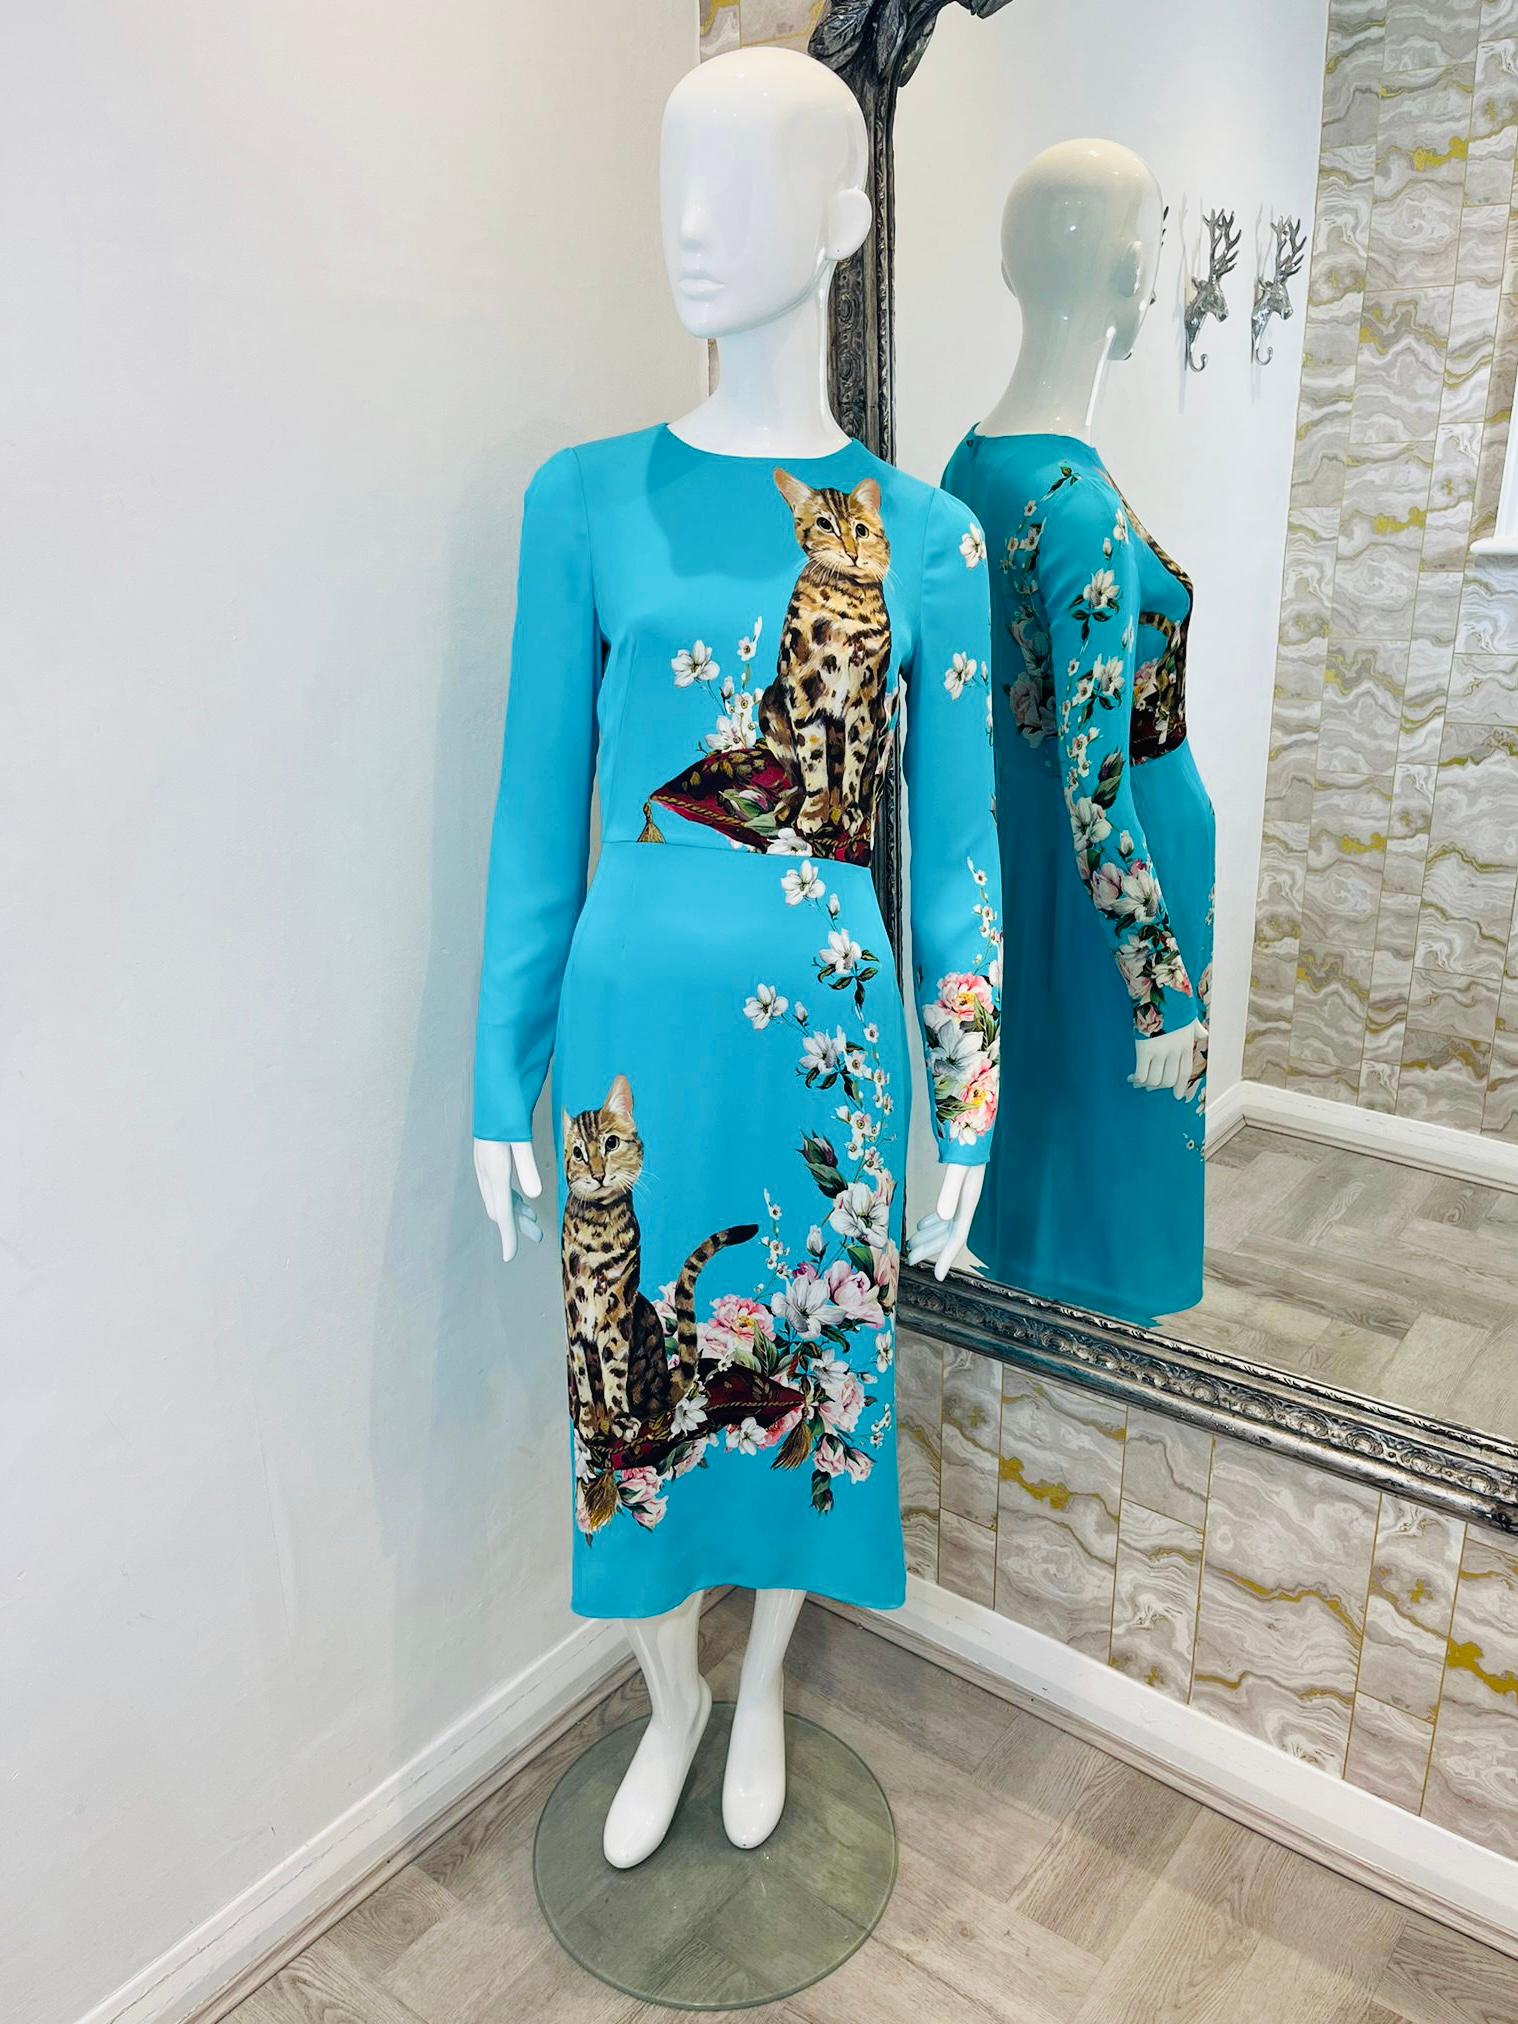 Dolce & Gabbana Silk Cat Print Dress

2018 Runway dress in turquoise blue with cat and floral print.

Size - 44IT

Condition - Excellent

Composition - Silk 